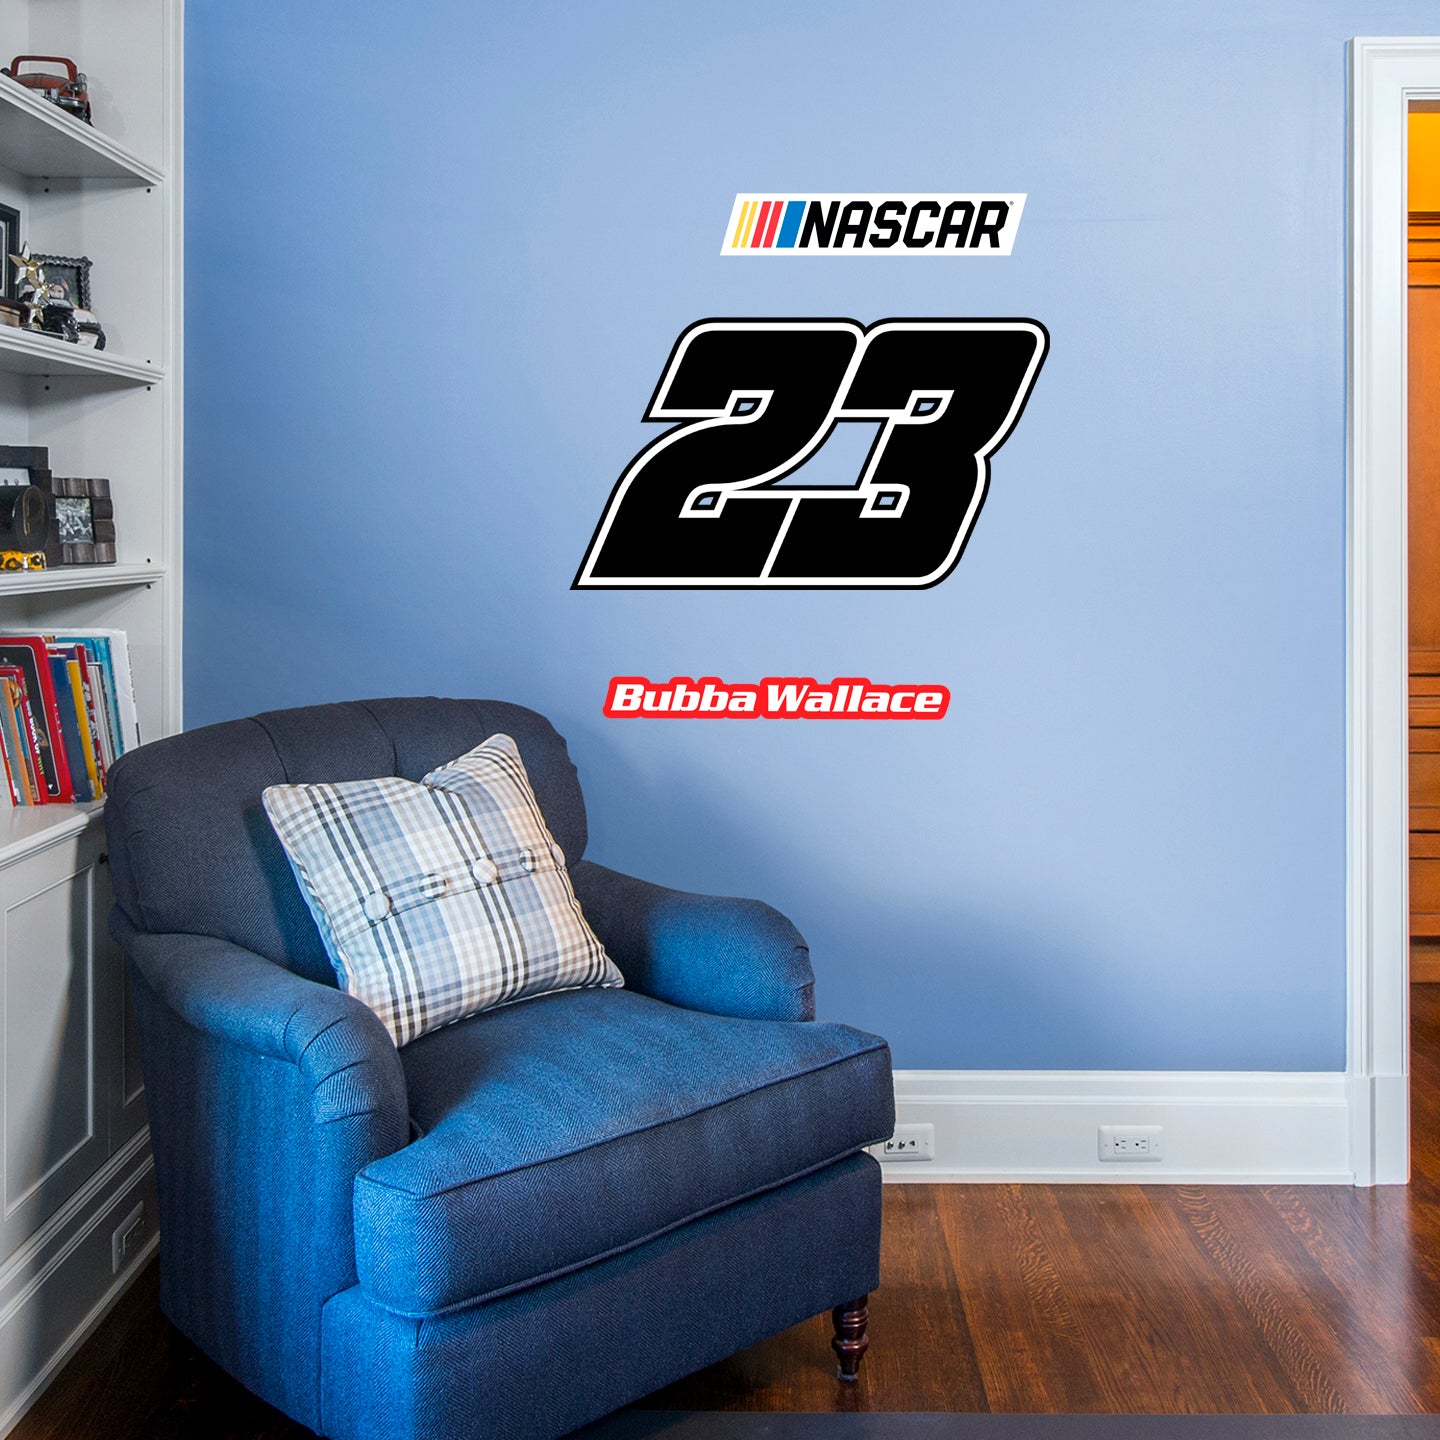 Bubba Wallace 2021 #23 Logo - Officially Licensed NASCAR Removable Wall Decal XL by Fathead | Vinyl